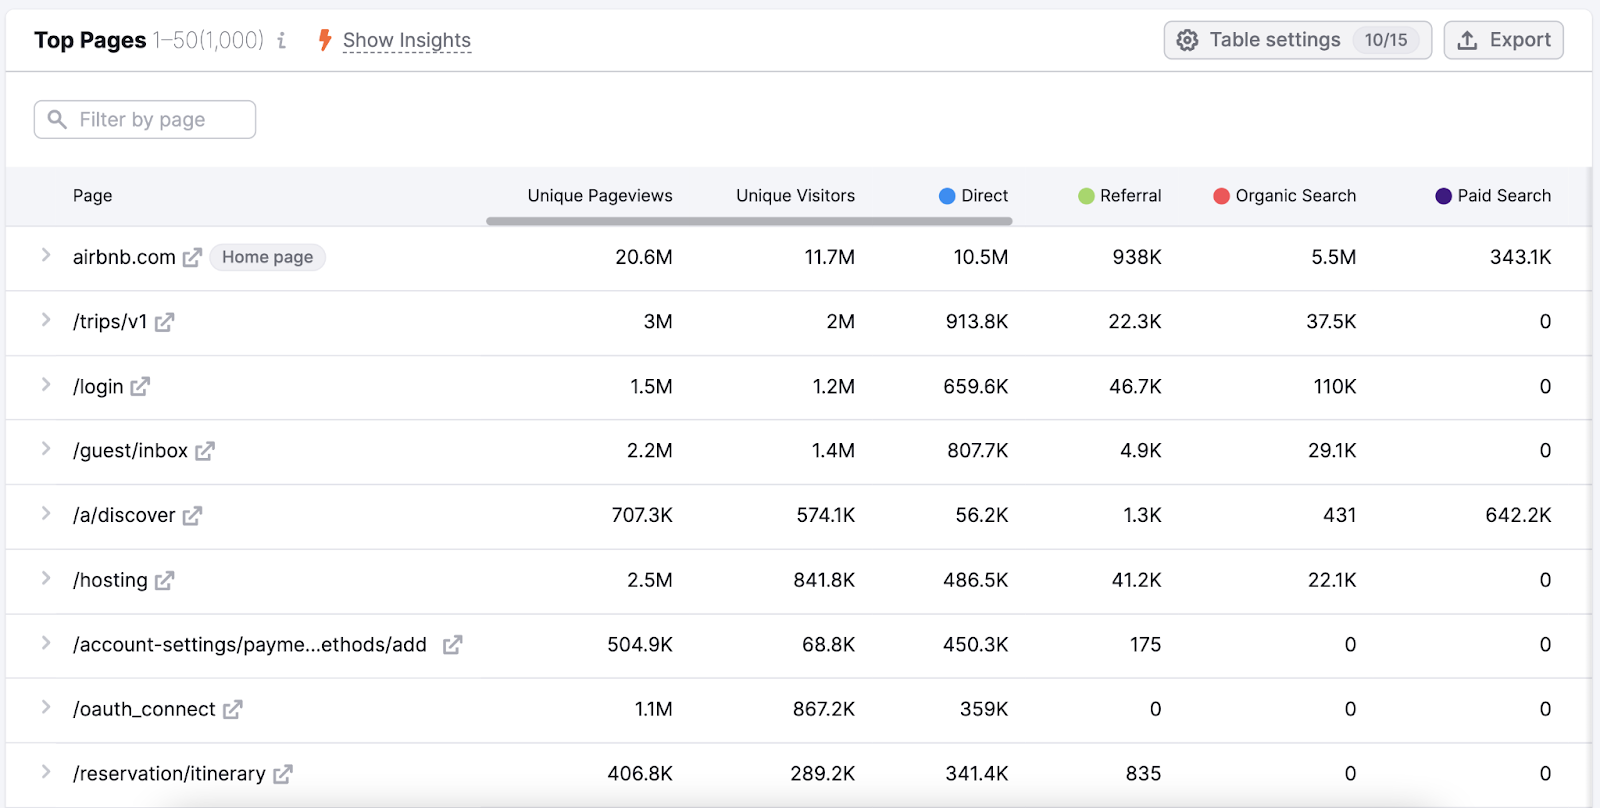 "Top Pages" table in Traffic Analytics tool